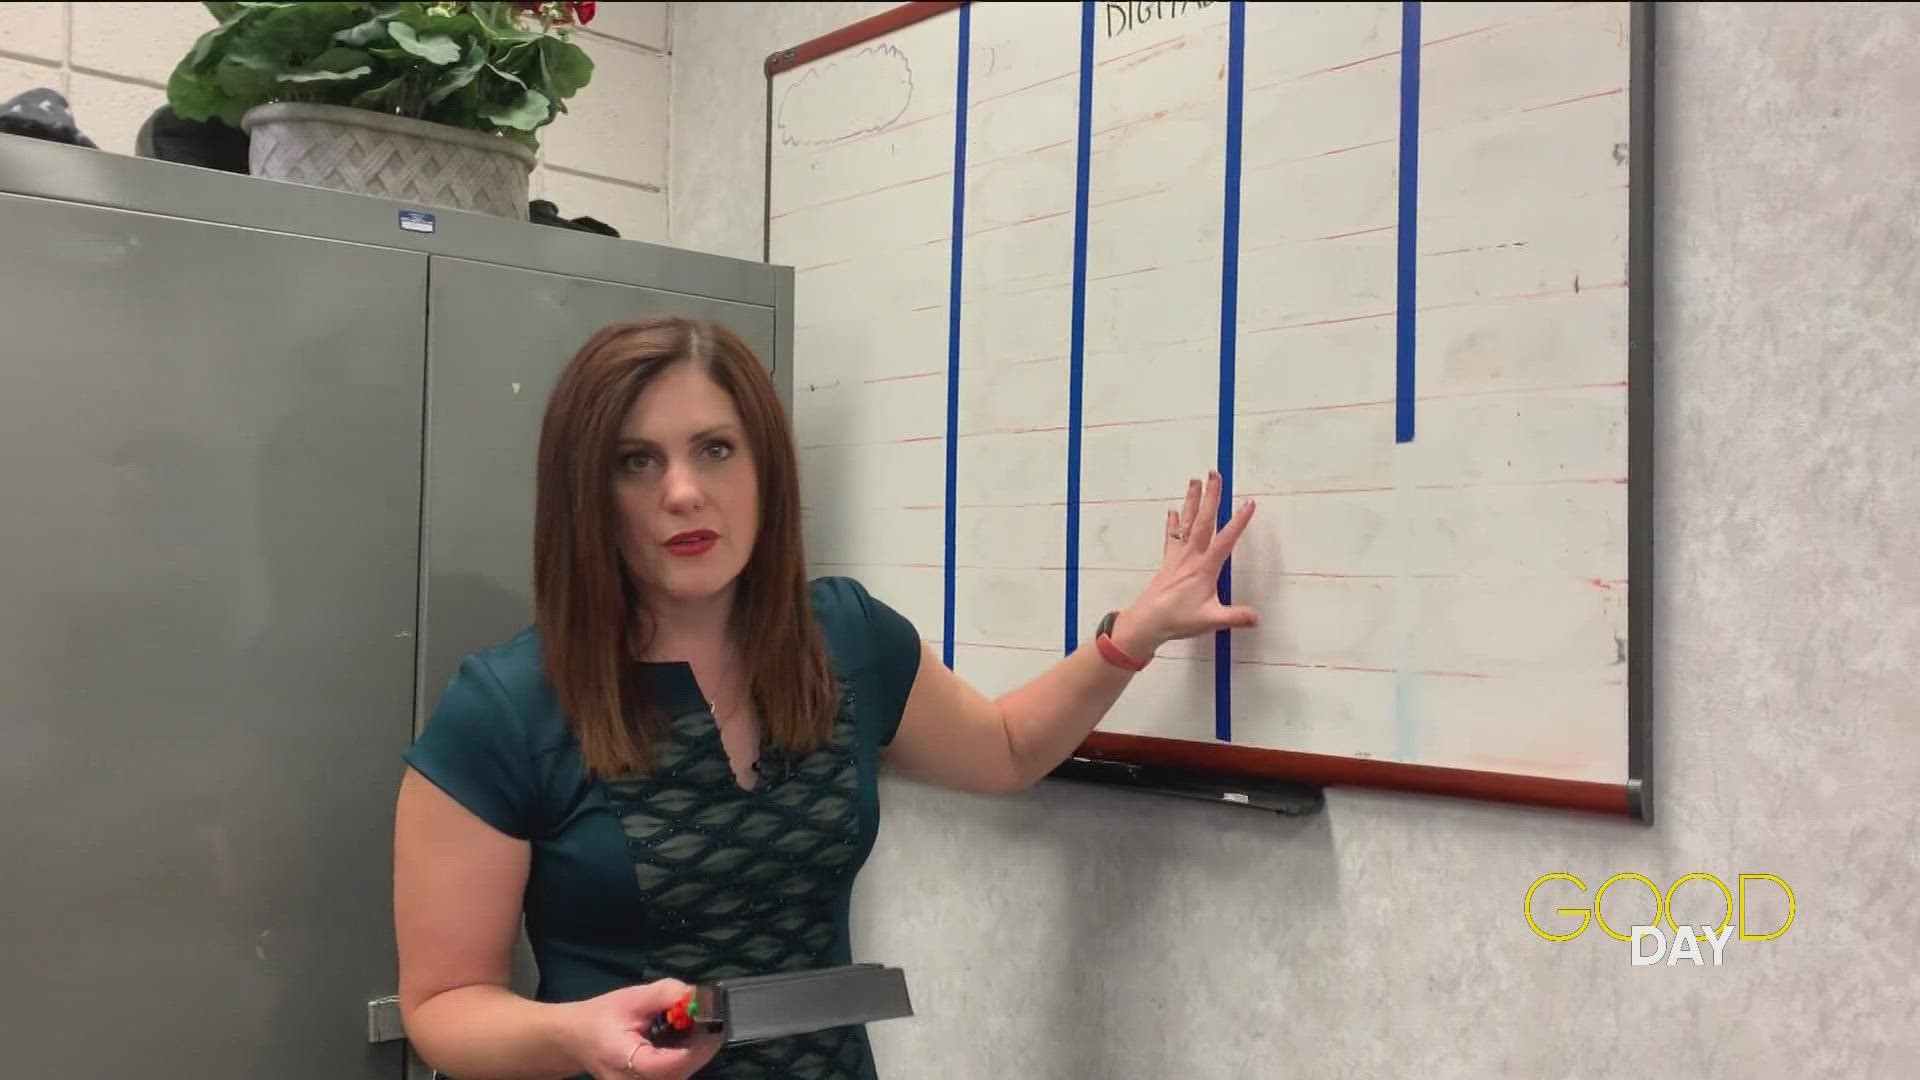 Amanda tries out a hack that claims to erase stubborn dry erase marker stains.